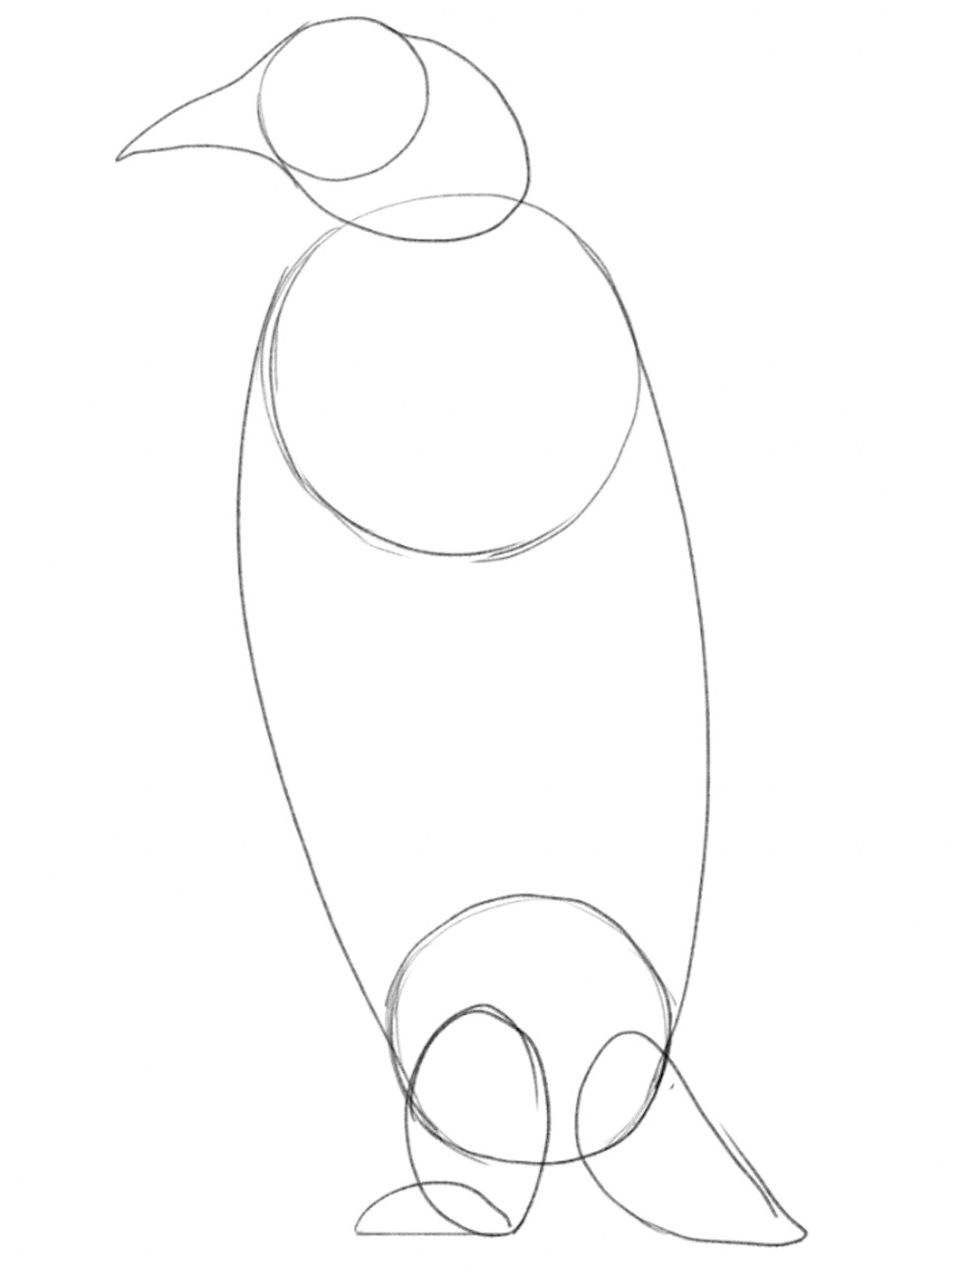 The rough outline of the penguin’s body.